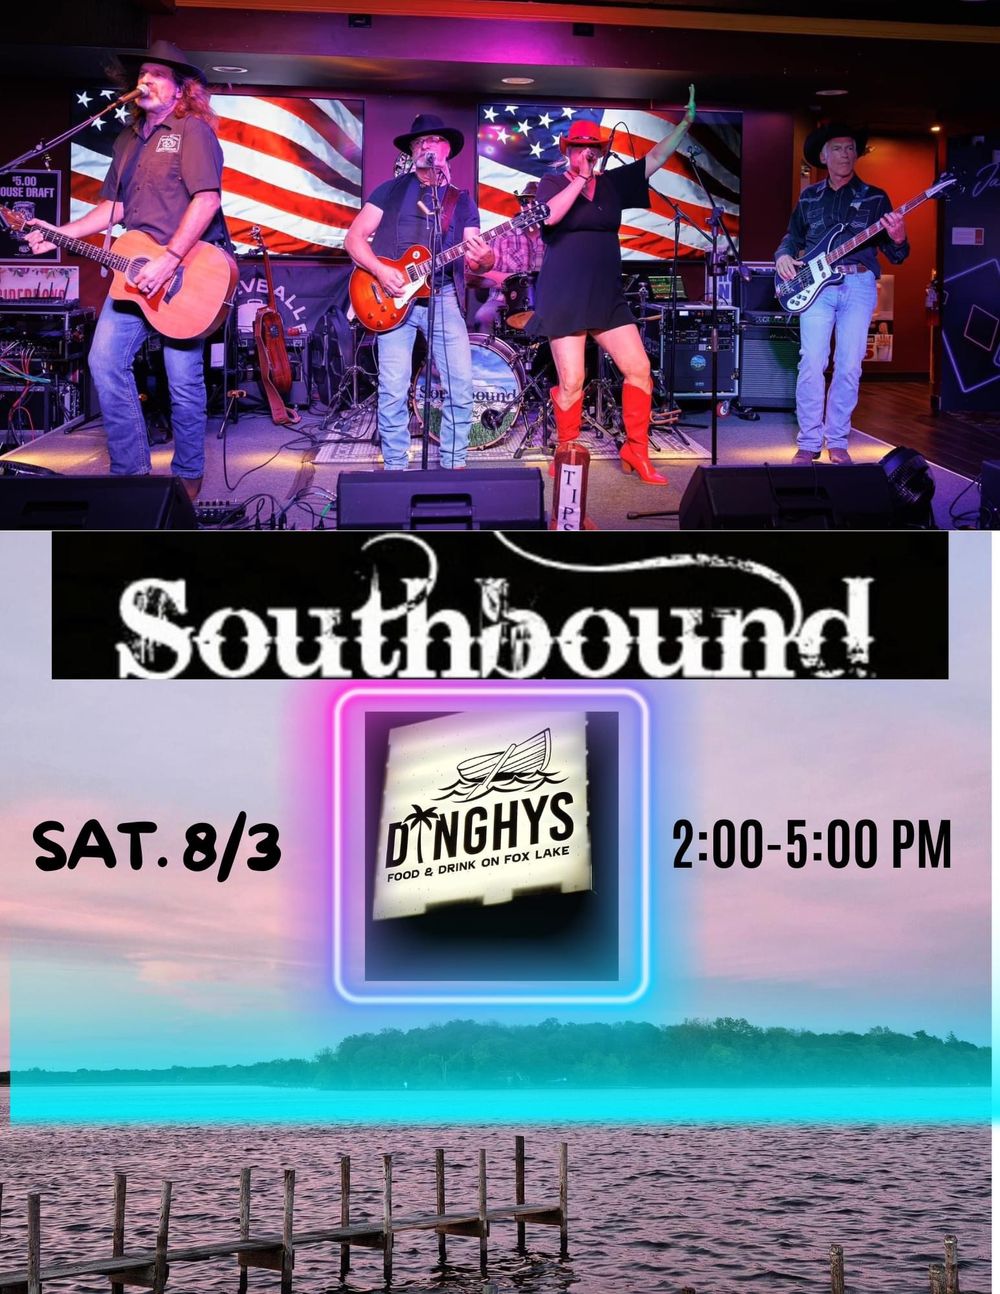 Southbound band Chicagoland country music line dancing live band fox lake chain o lakes boat bar restaurant